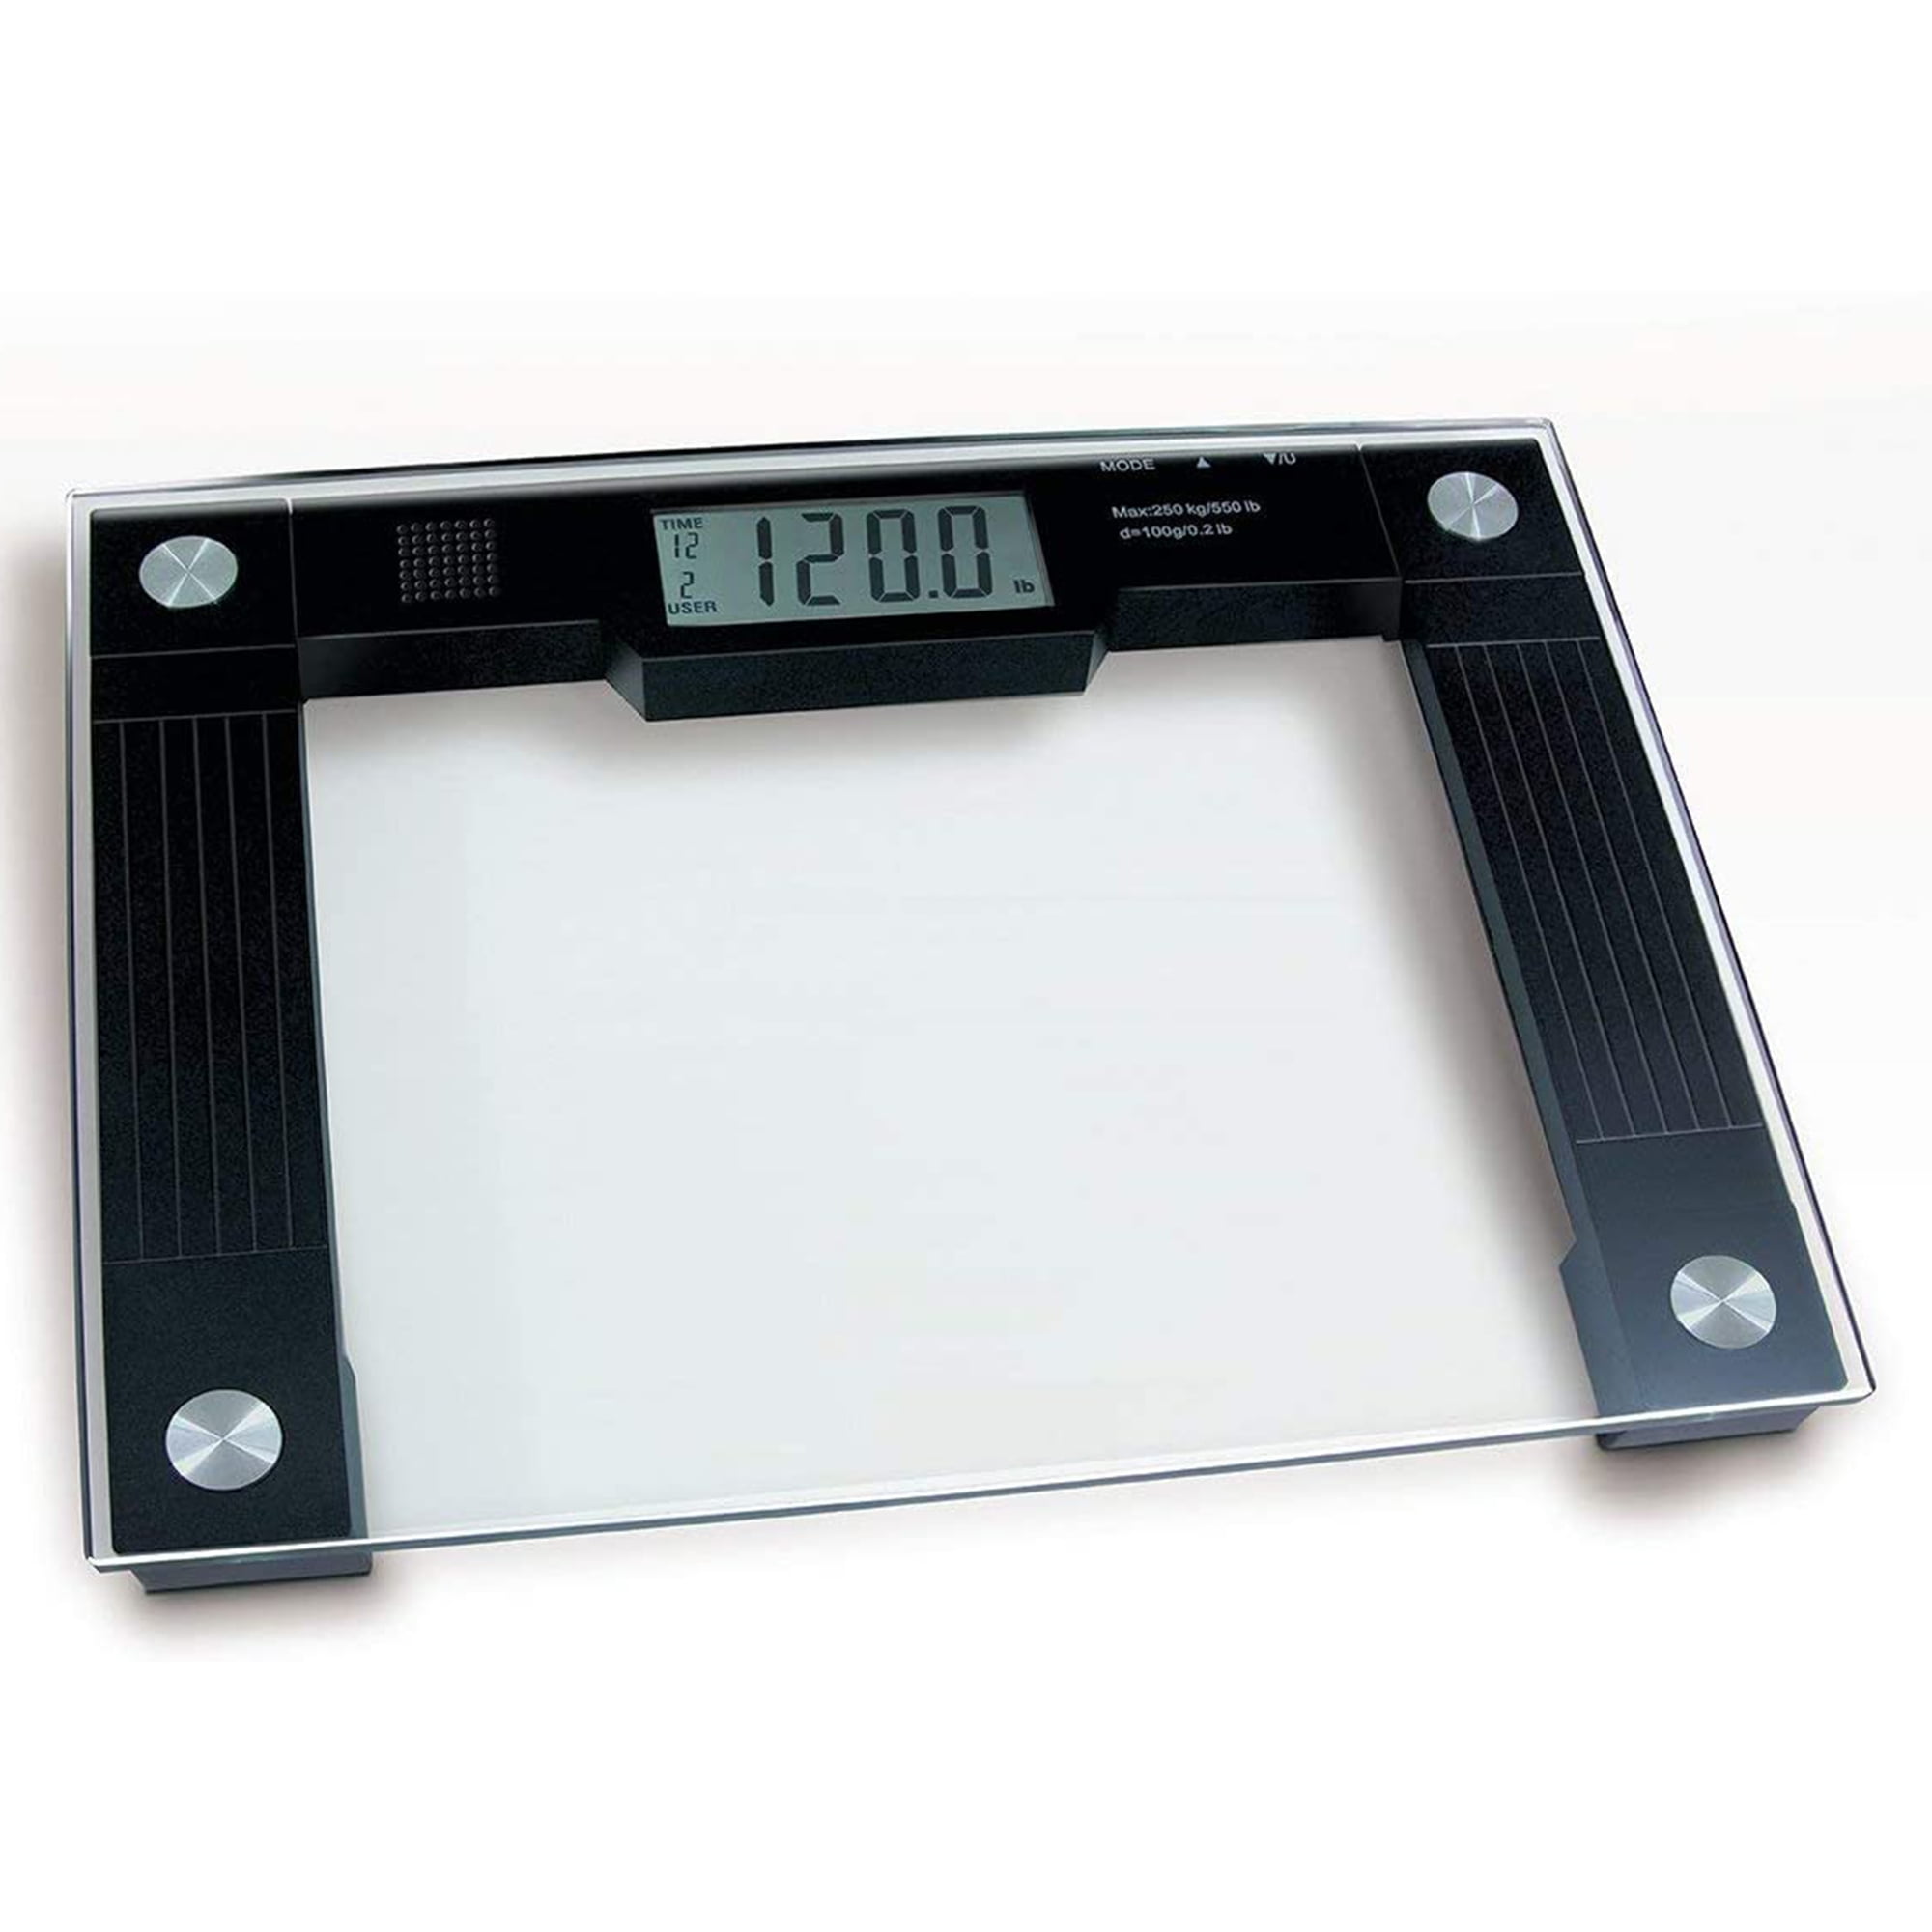 Why the SlimTALK Scale Will Change the Way You Weigh 